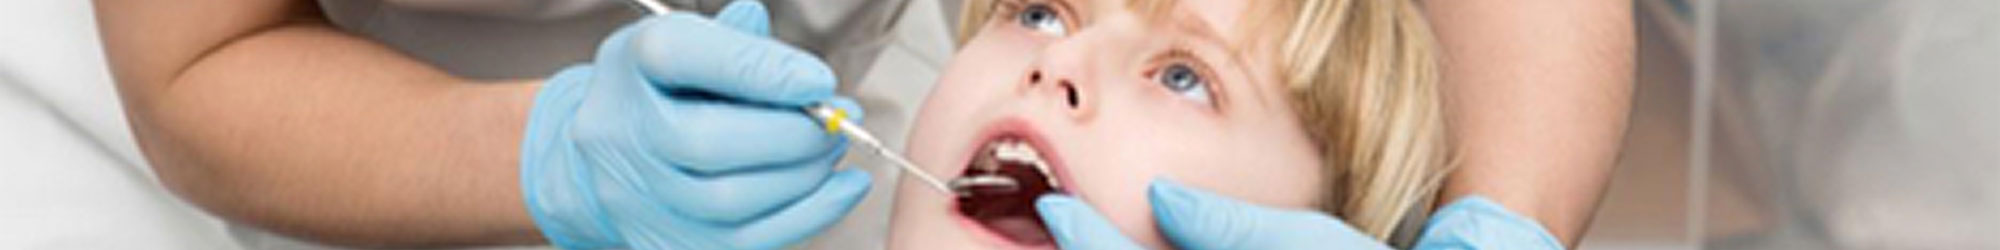 Affordable Dental Insurance in Wisconsin